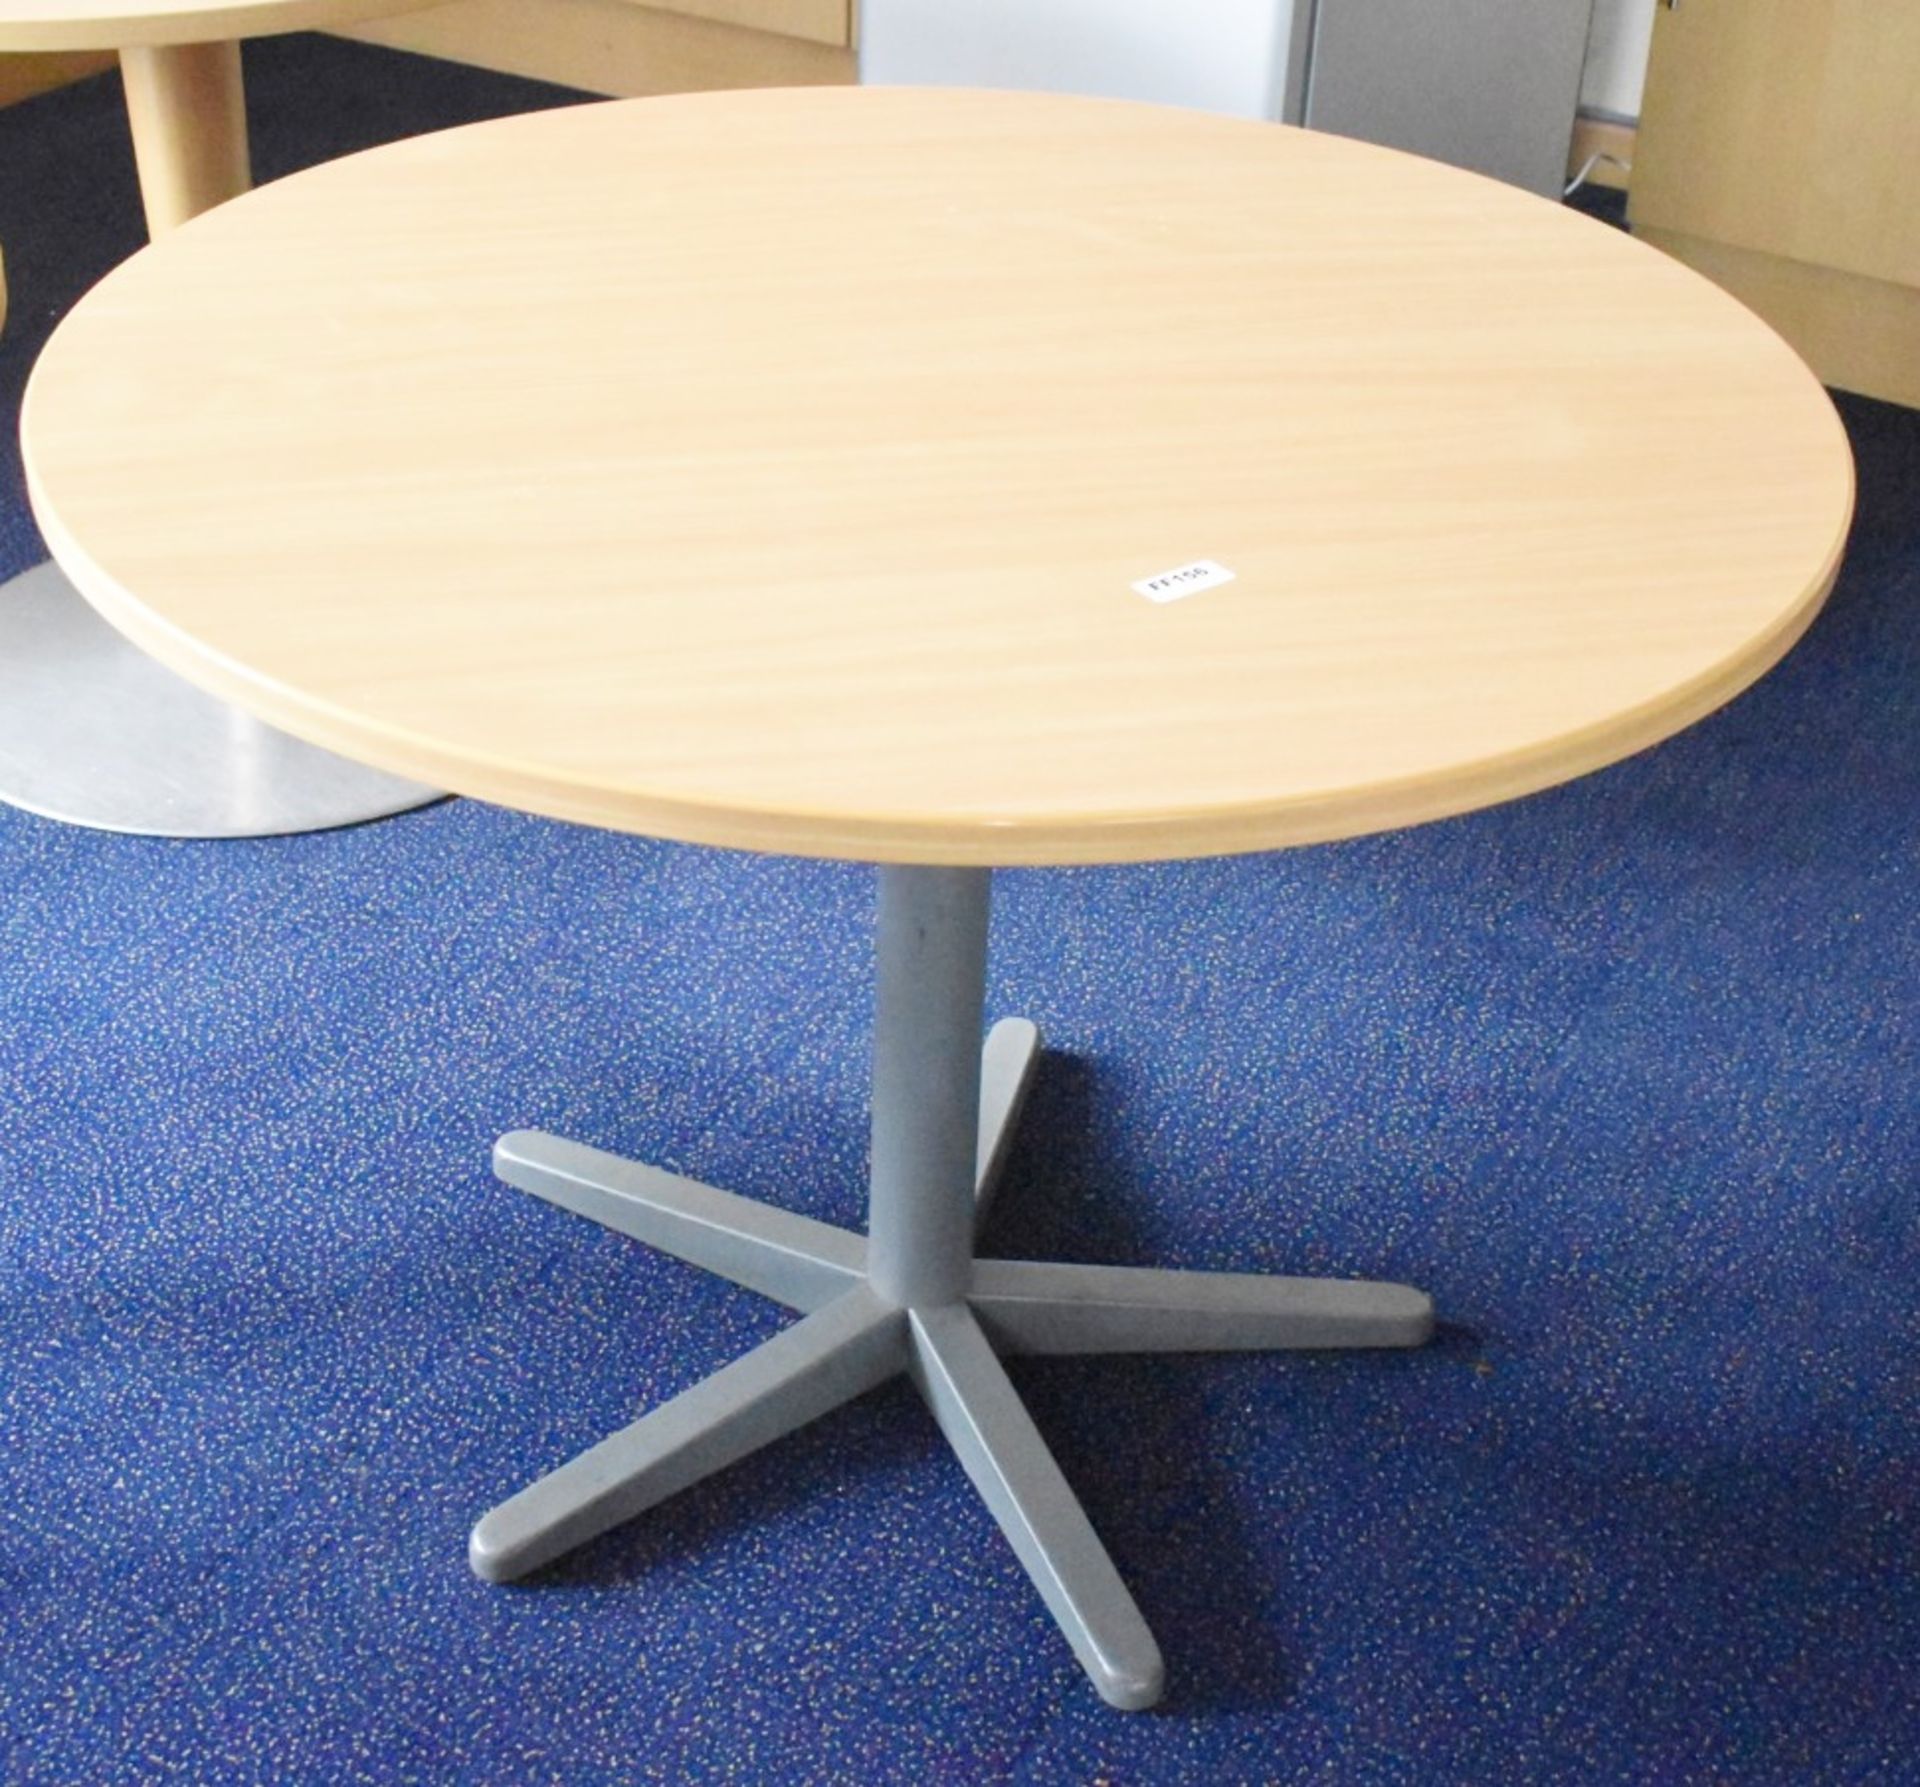 3 x Round Canteen Staff Room Tables in Beech With 8 x Plastic Chairs in Black and Red and 2 x Office - Image 4 of 5